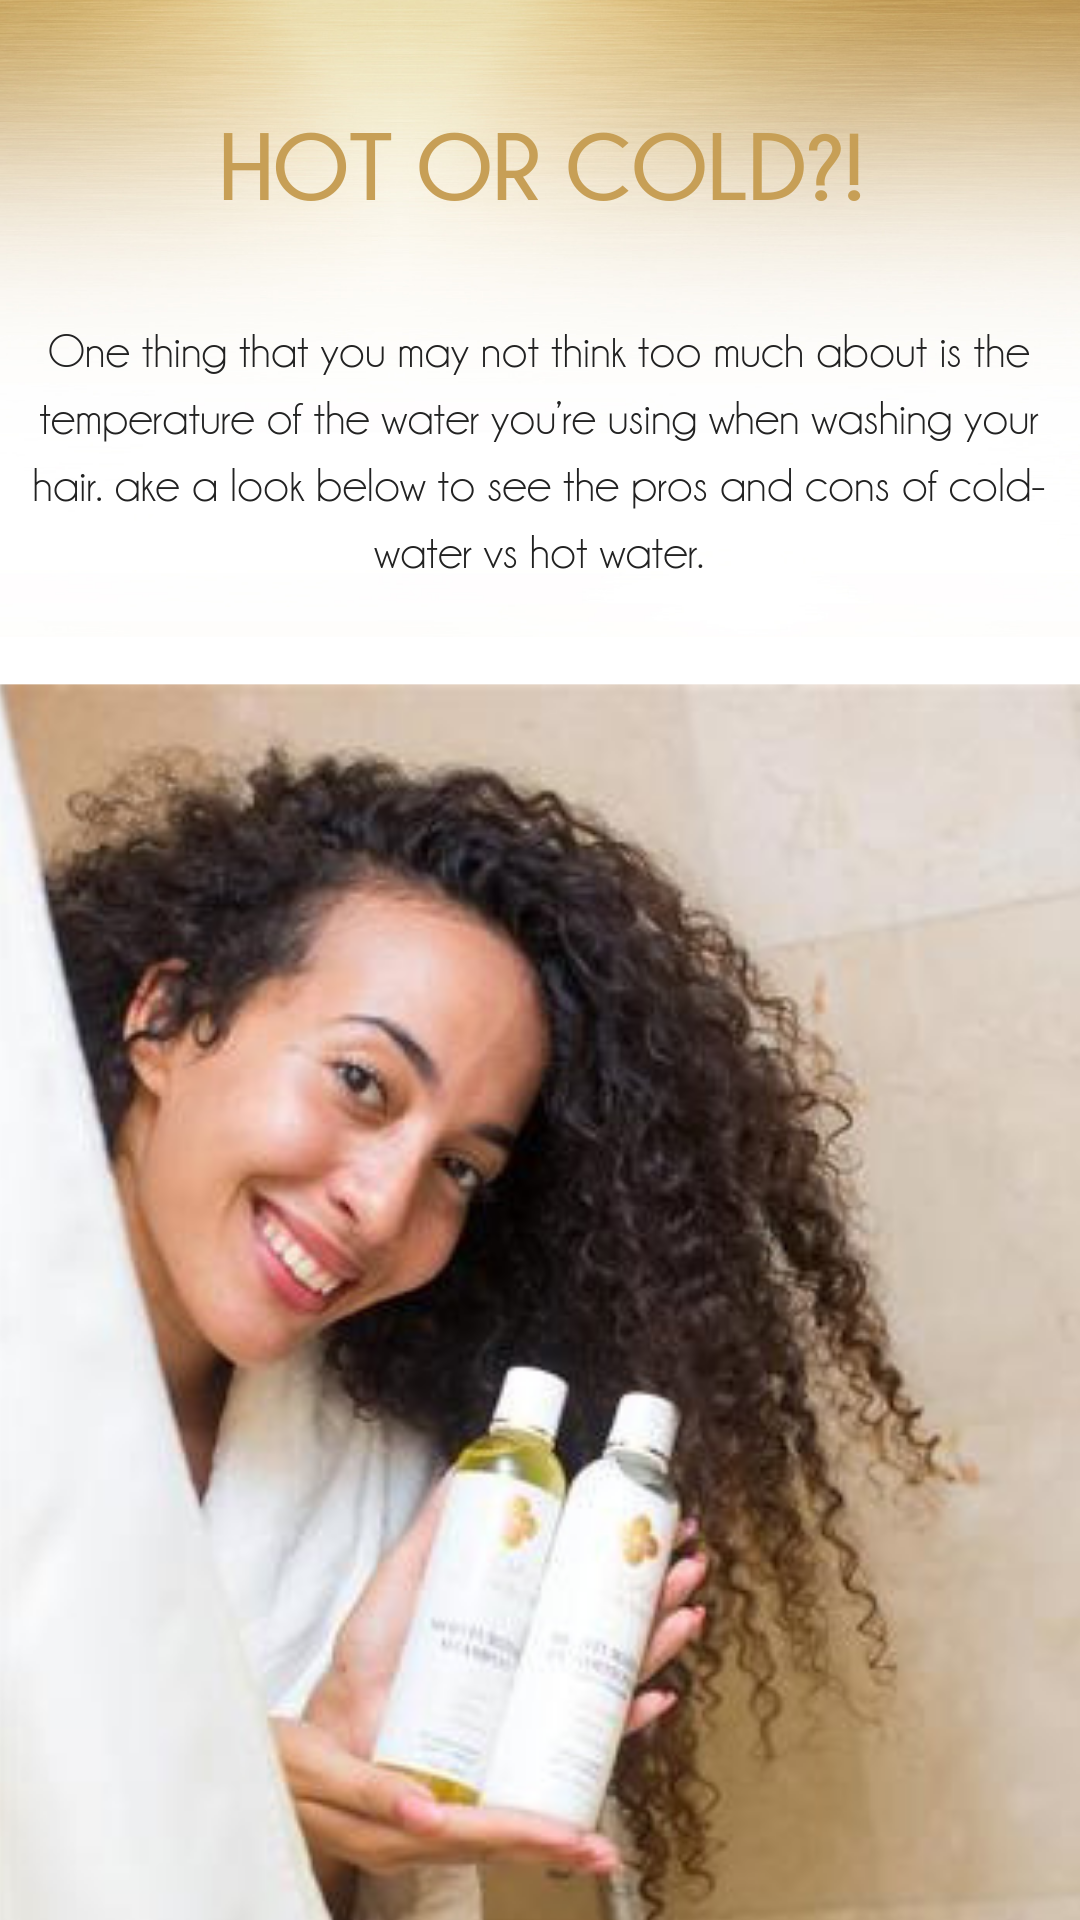 Hot or Cold? Pros and Cons of Washing Hair with Different Temperatures